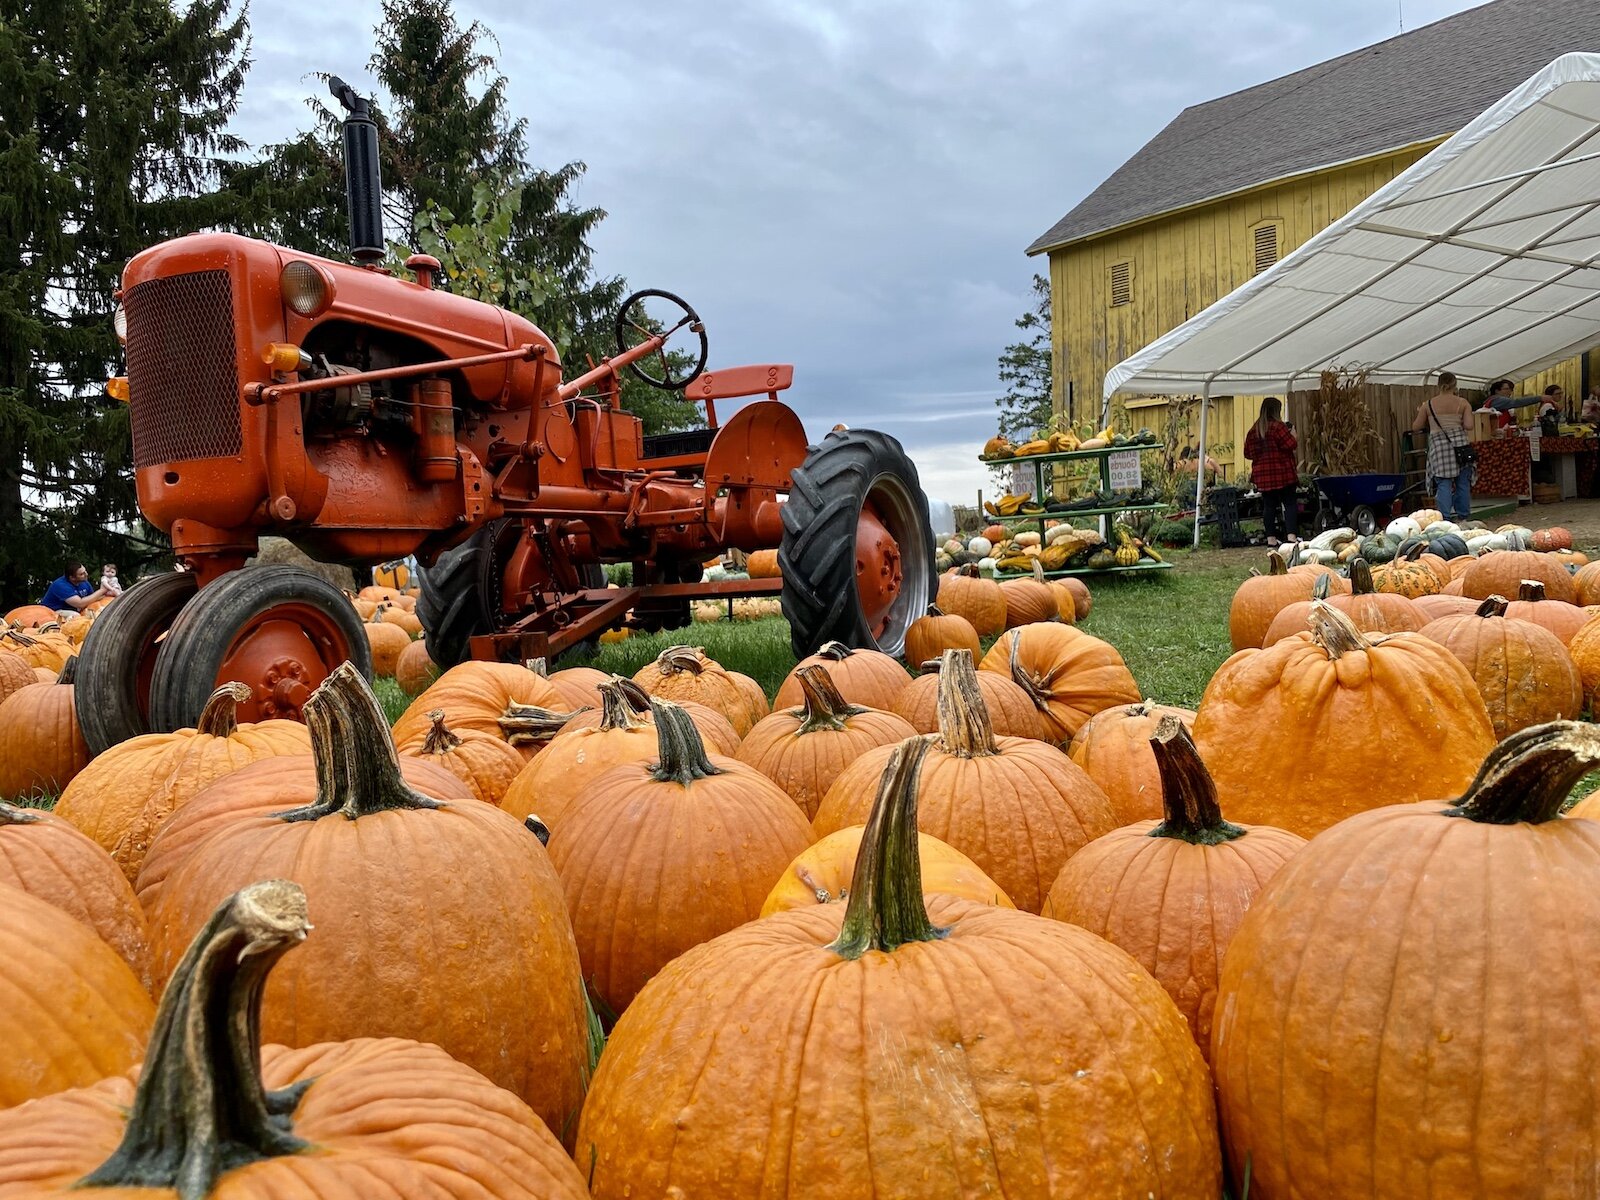 Hilger Family Farm is one of many places you can find fall favorites.